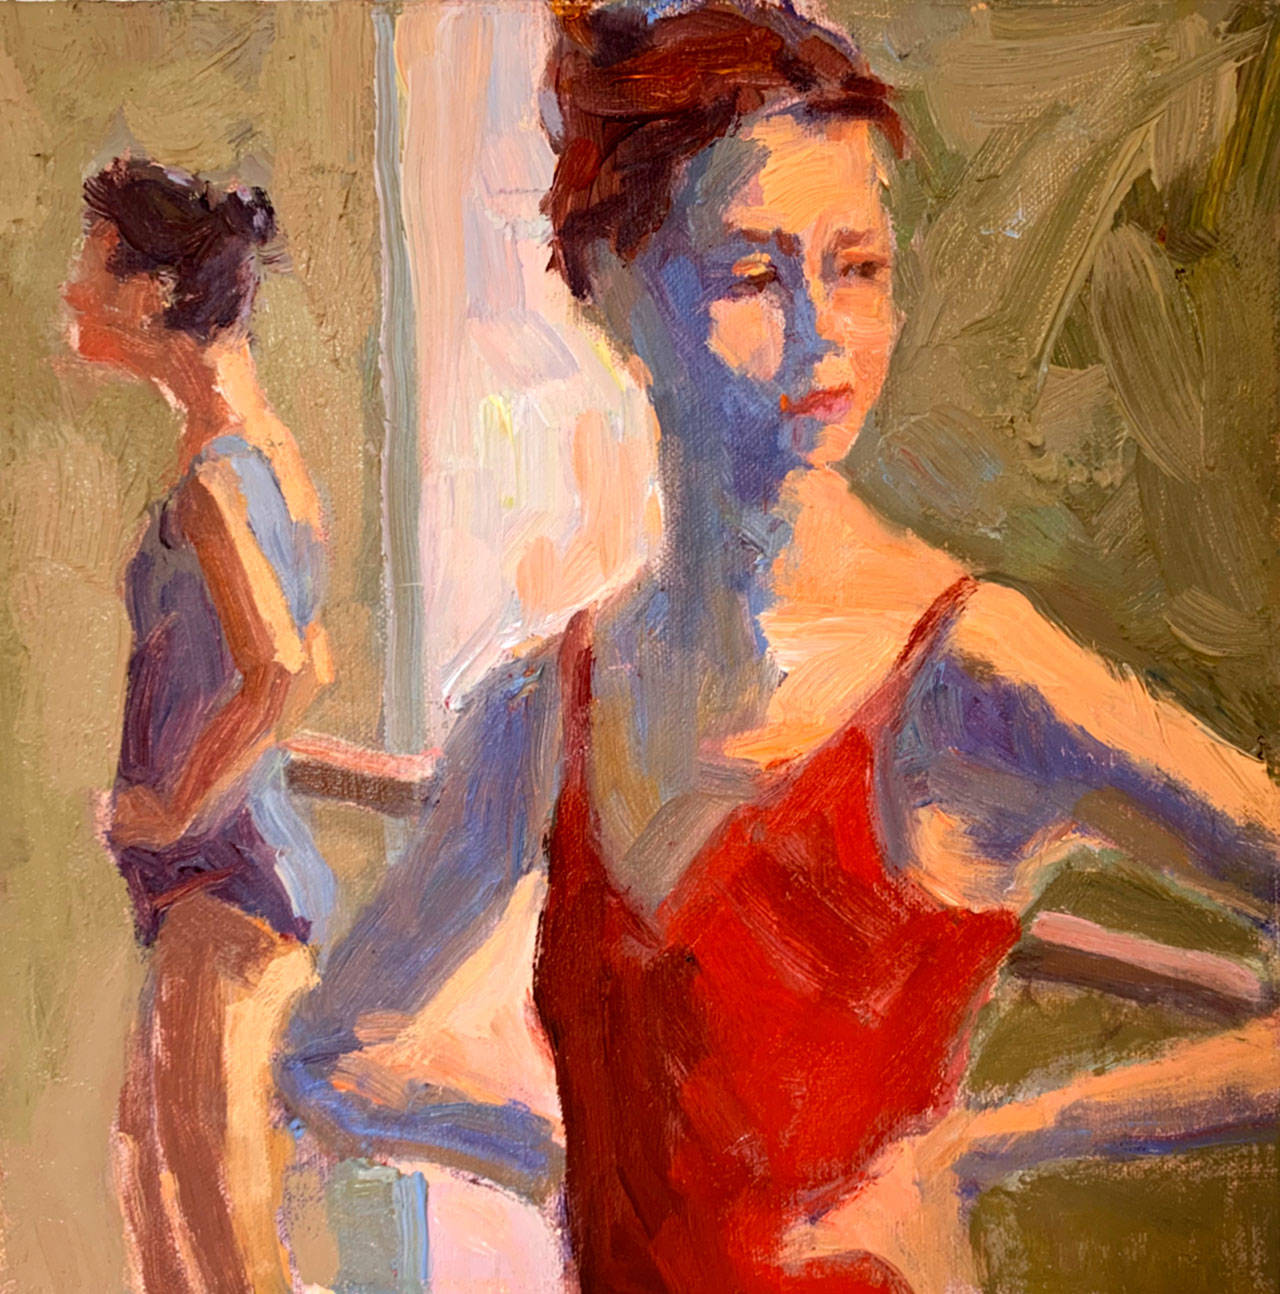 “Before the Dance” by Jeanne Edwards of Port Angeles is among nearly 100 works in “The Power of Small Things” show at the Port Angeles Fine Arts Center. Submitted art